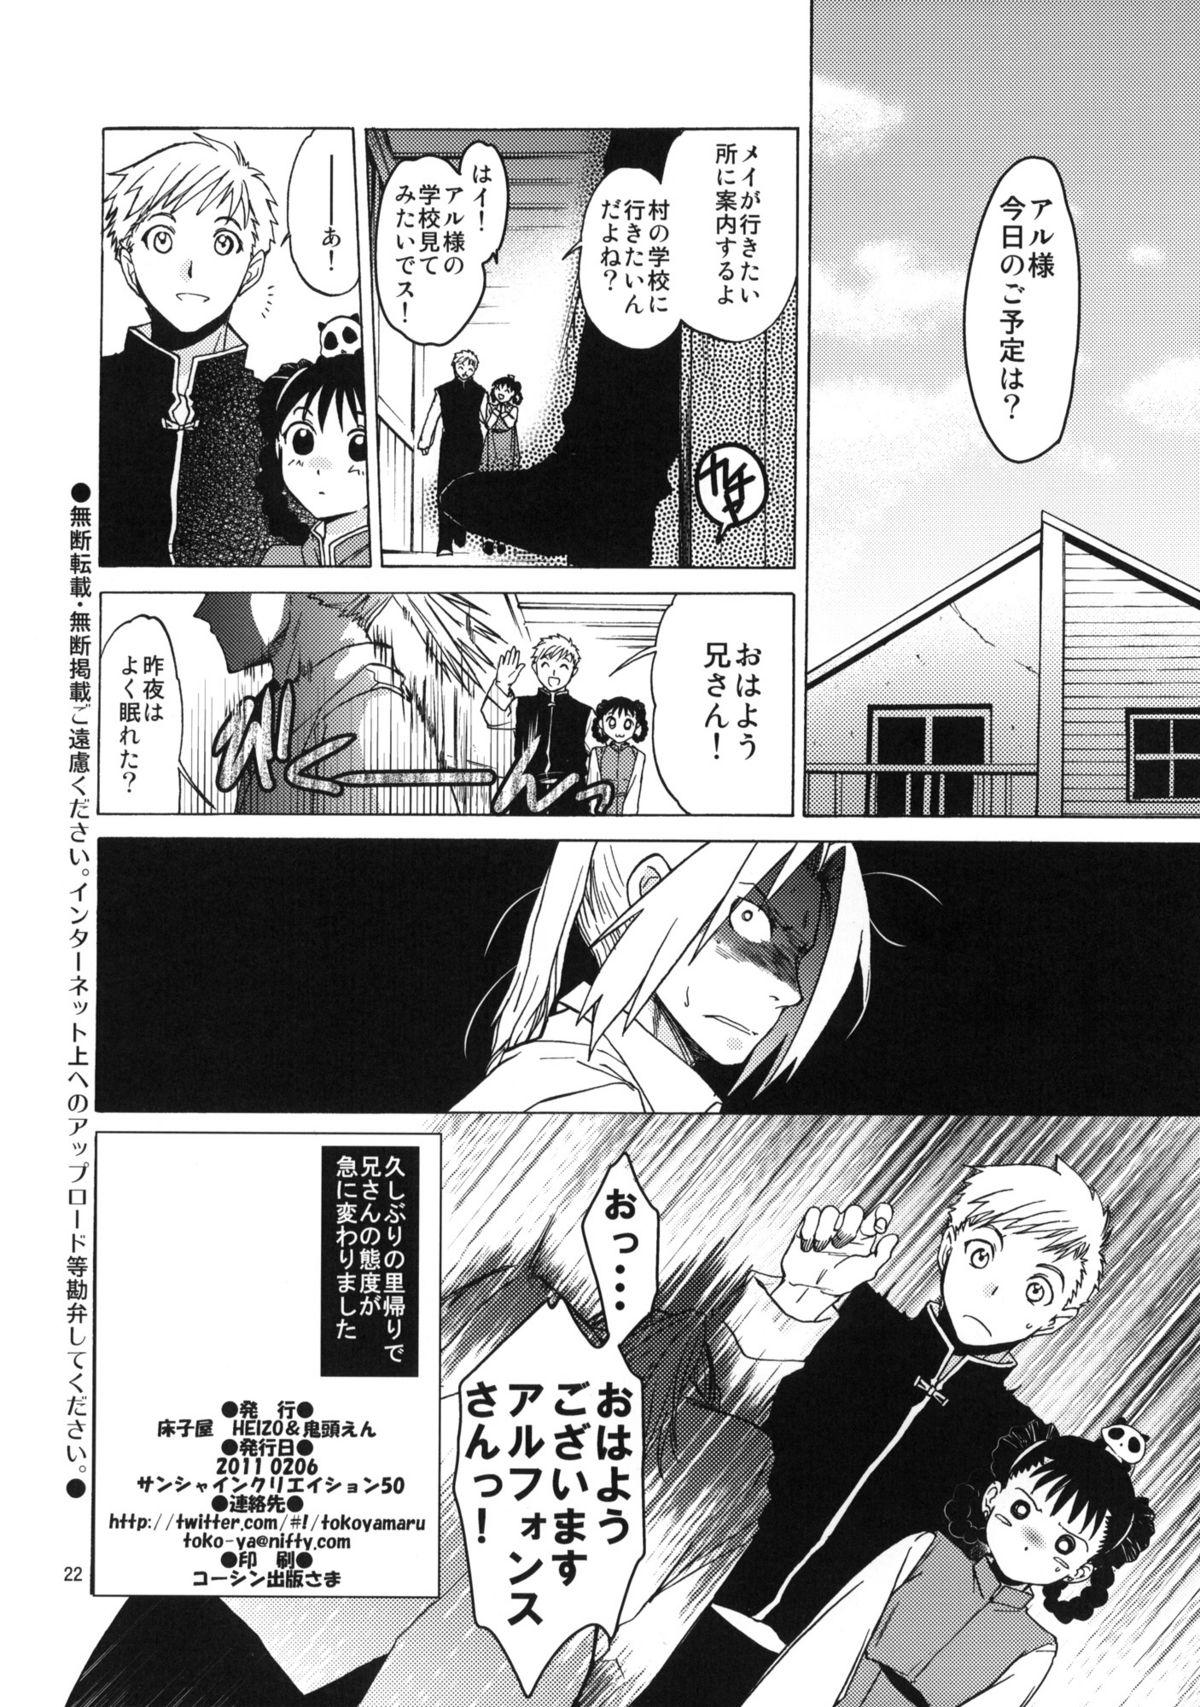 Sucking Dick EDxWIN 5 Al x May! - Fullmetal alchemist Babes - Page 21